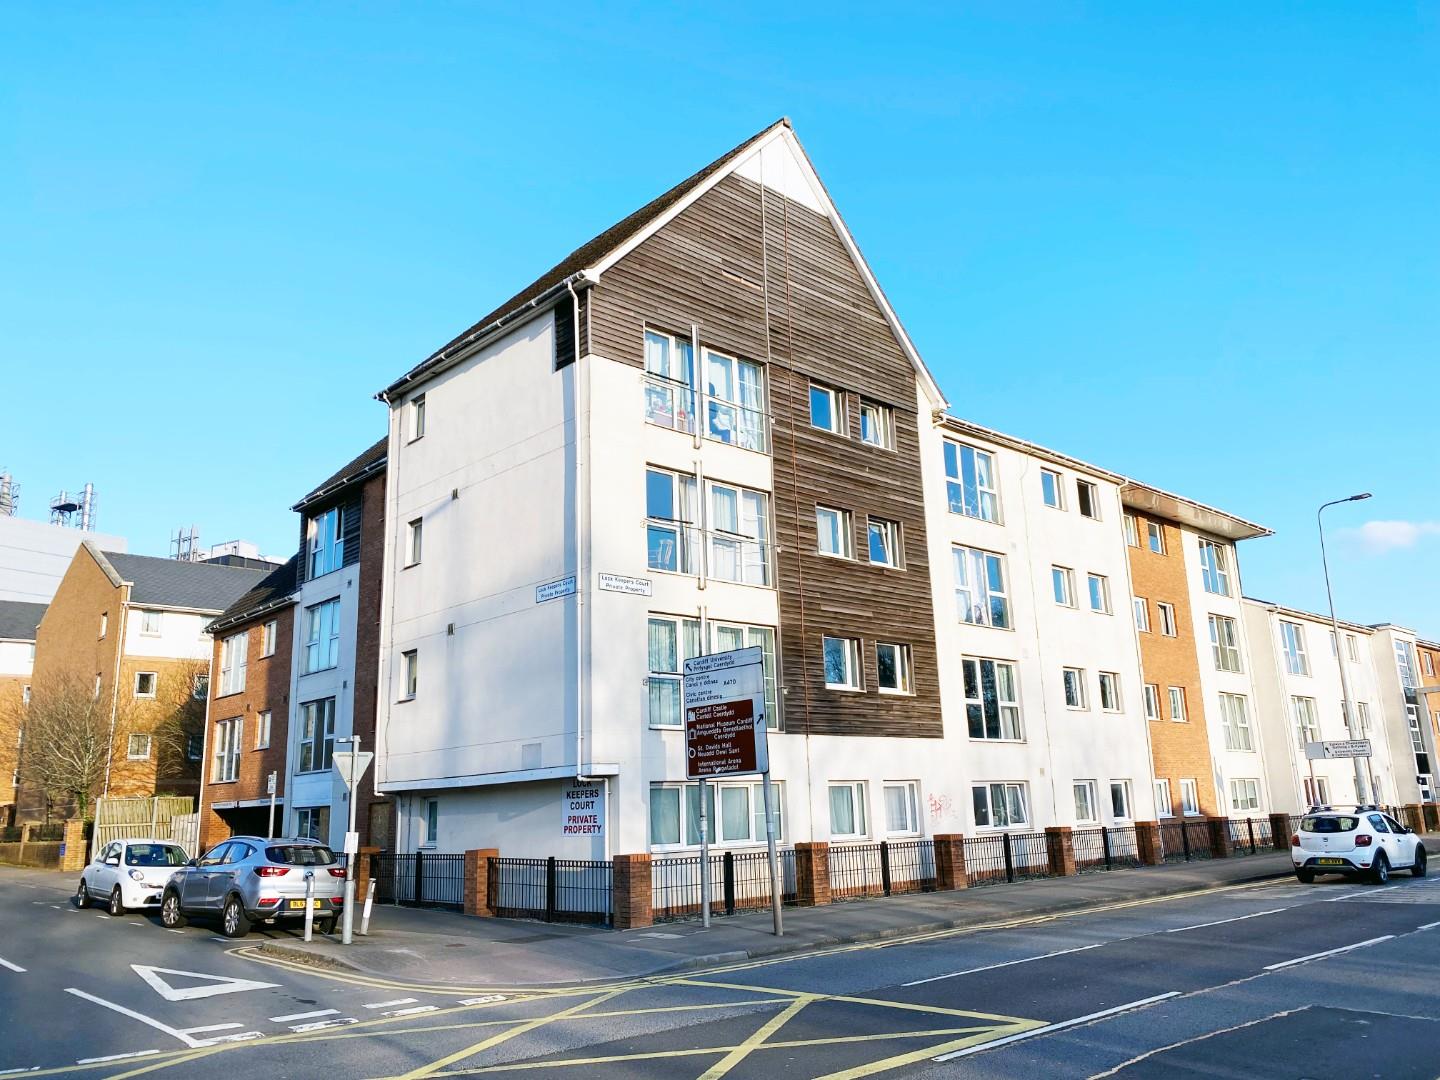 2 bed apartment for sale in Blackweir Terrace, Cardiff, CF10